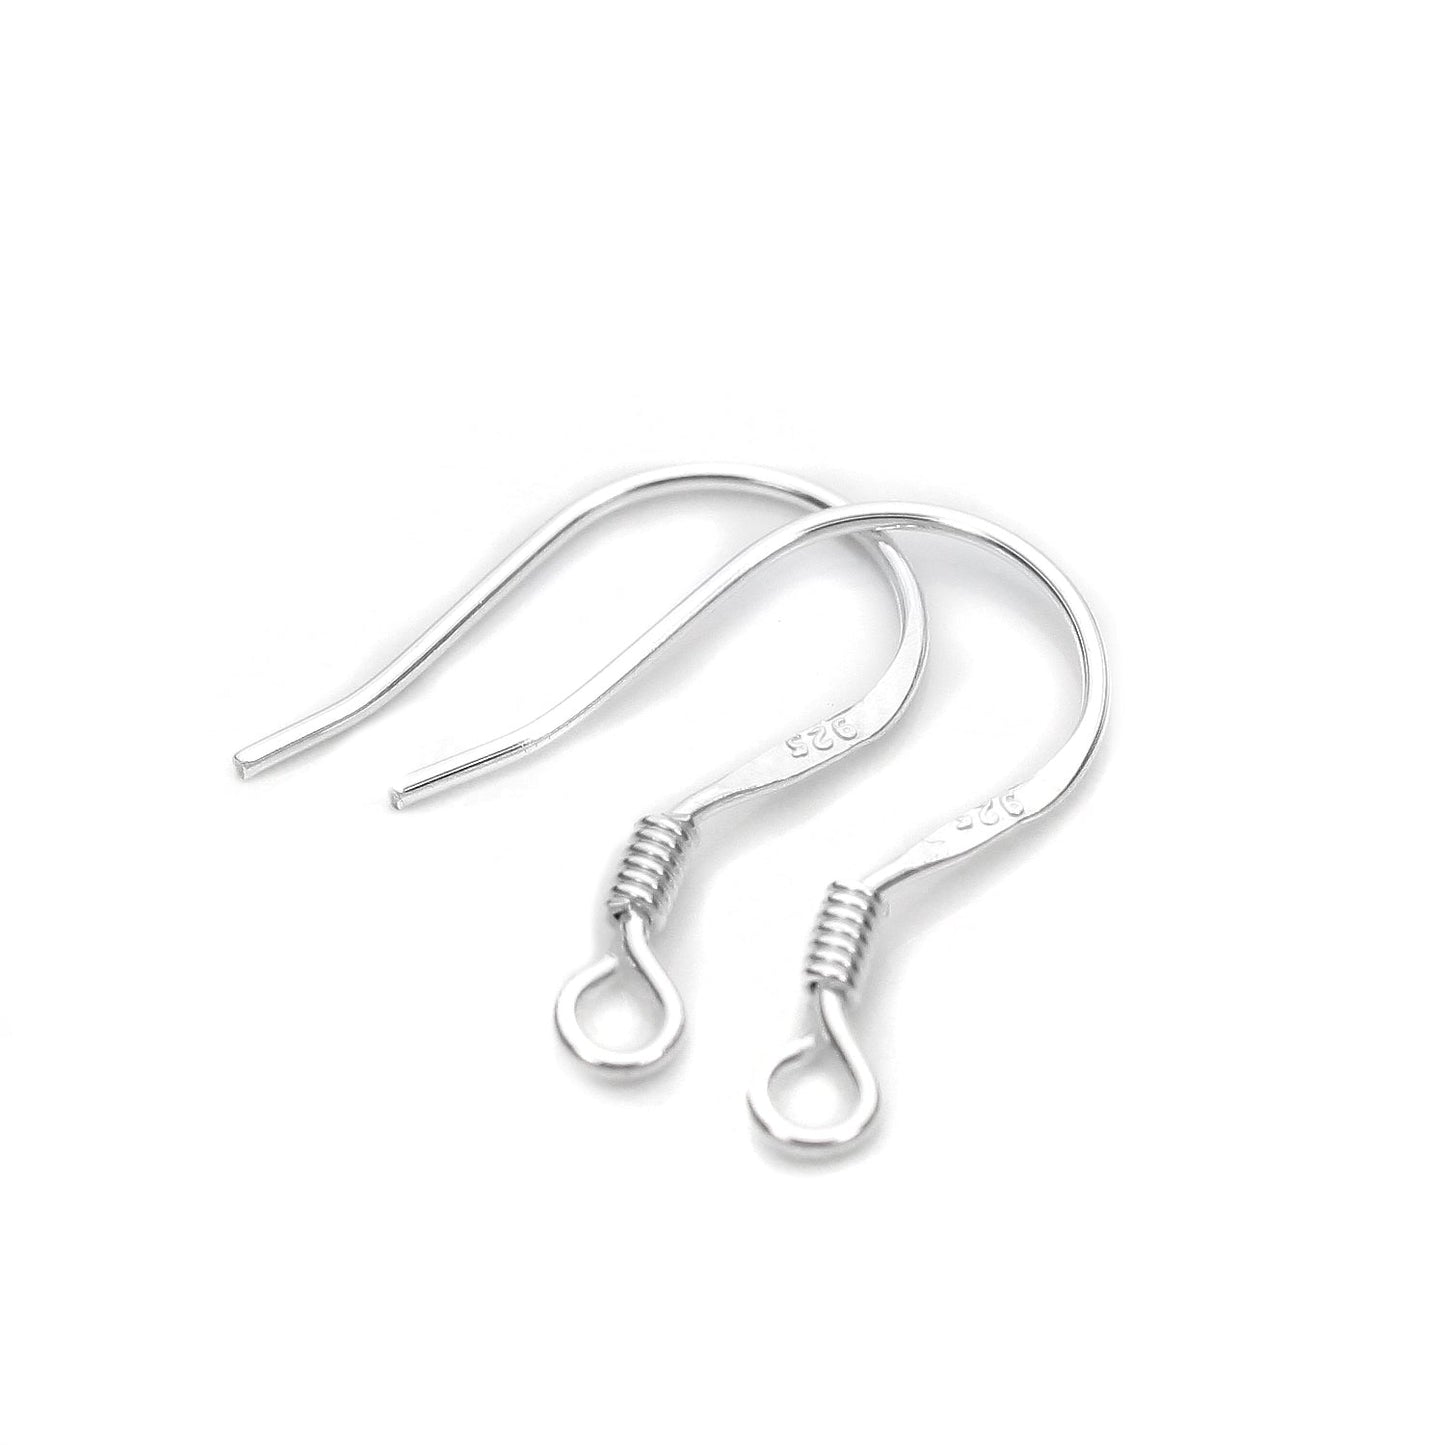 2 x Sterling Silver Earring Wires